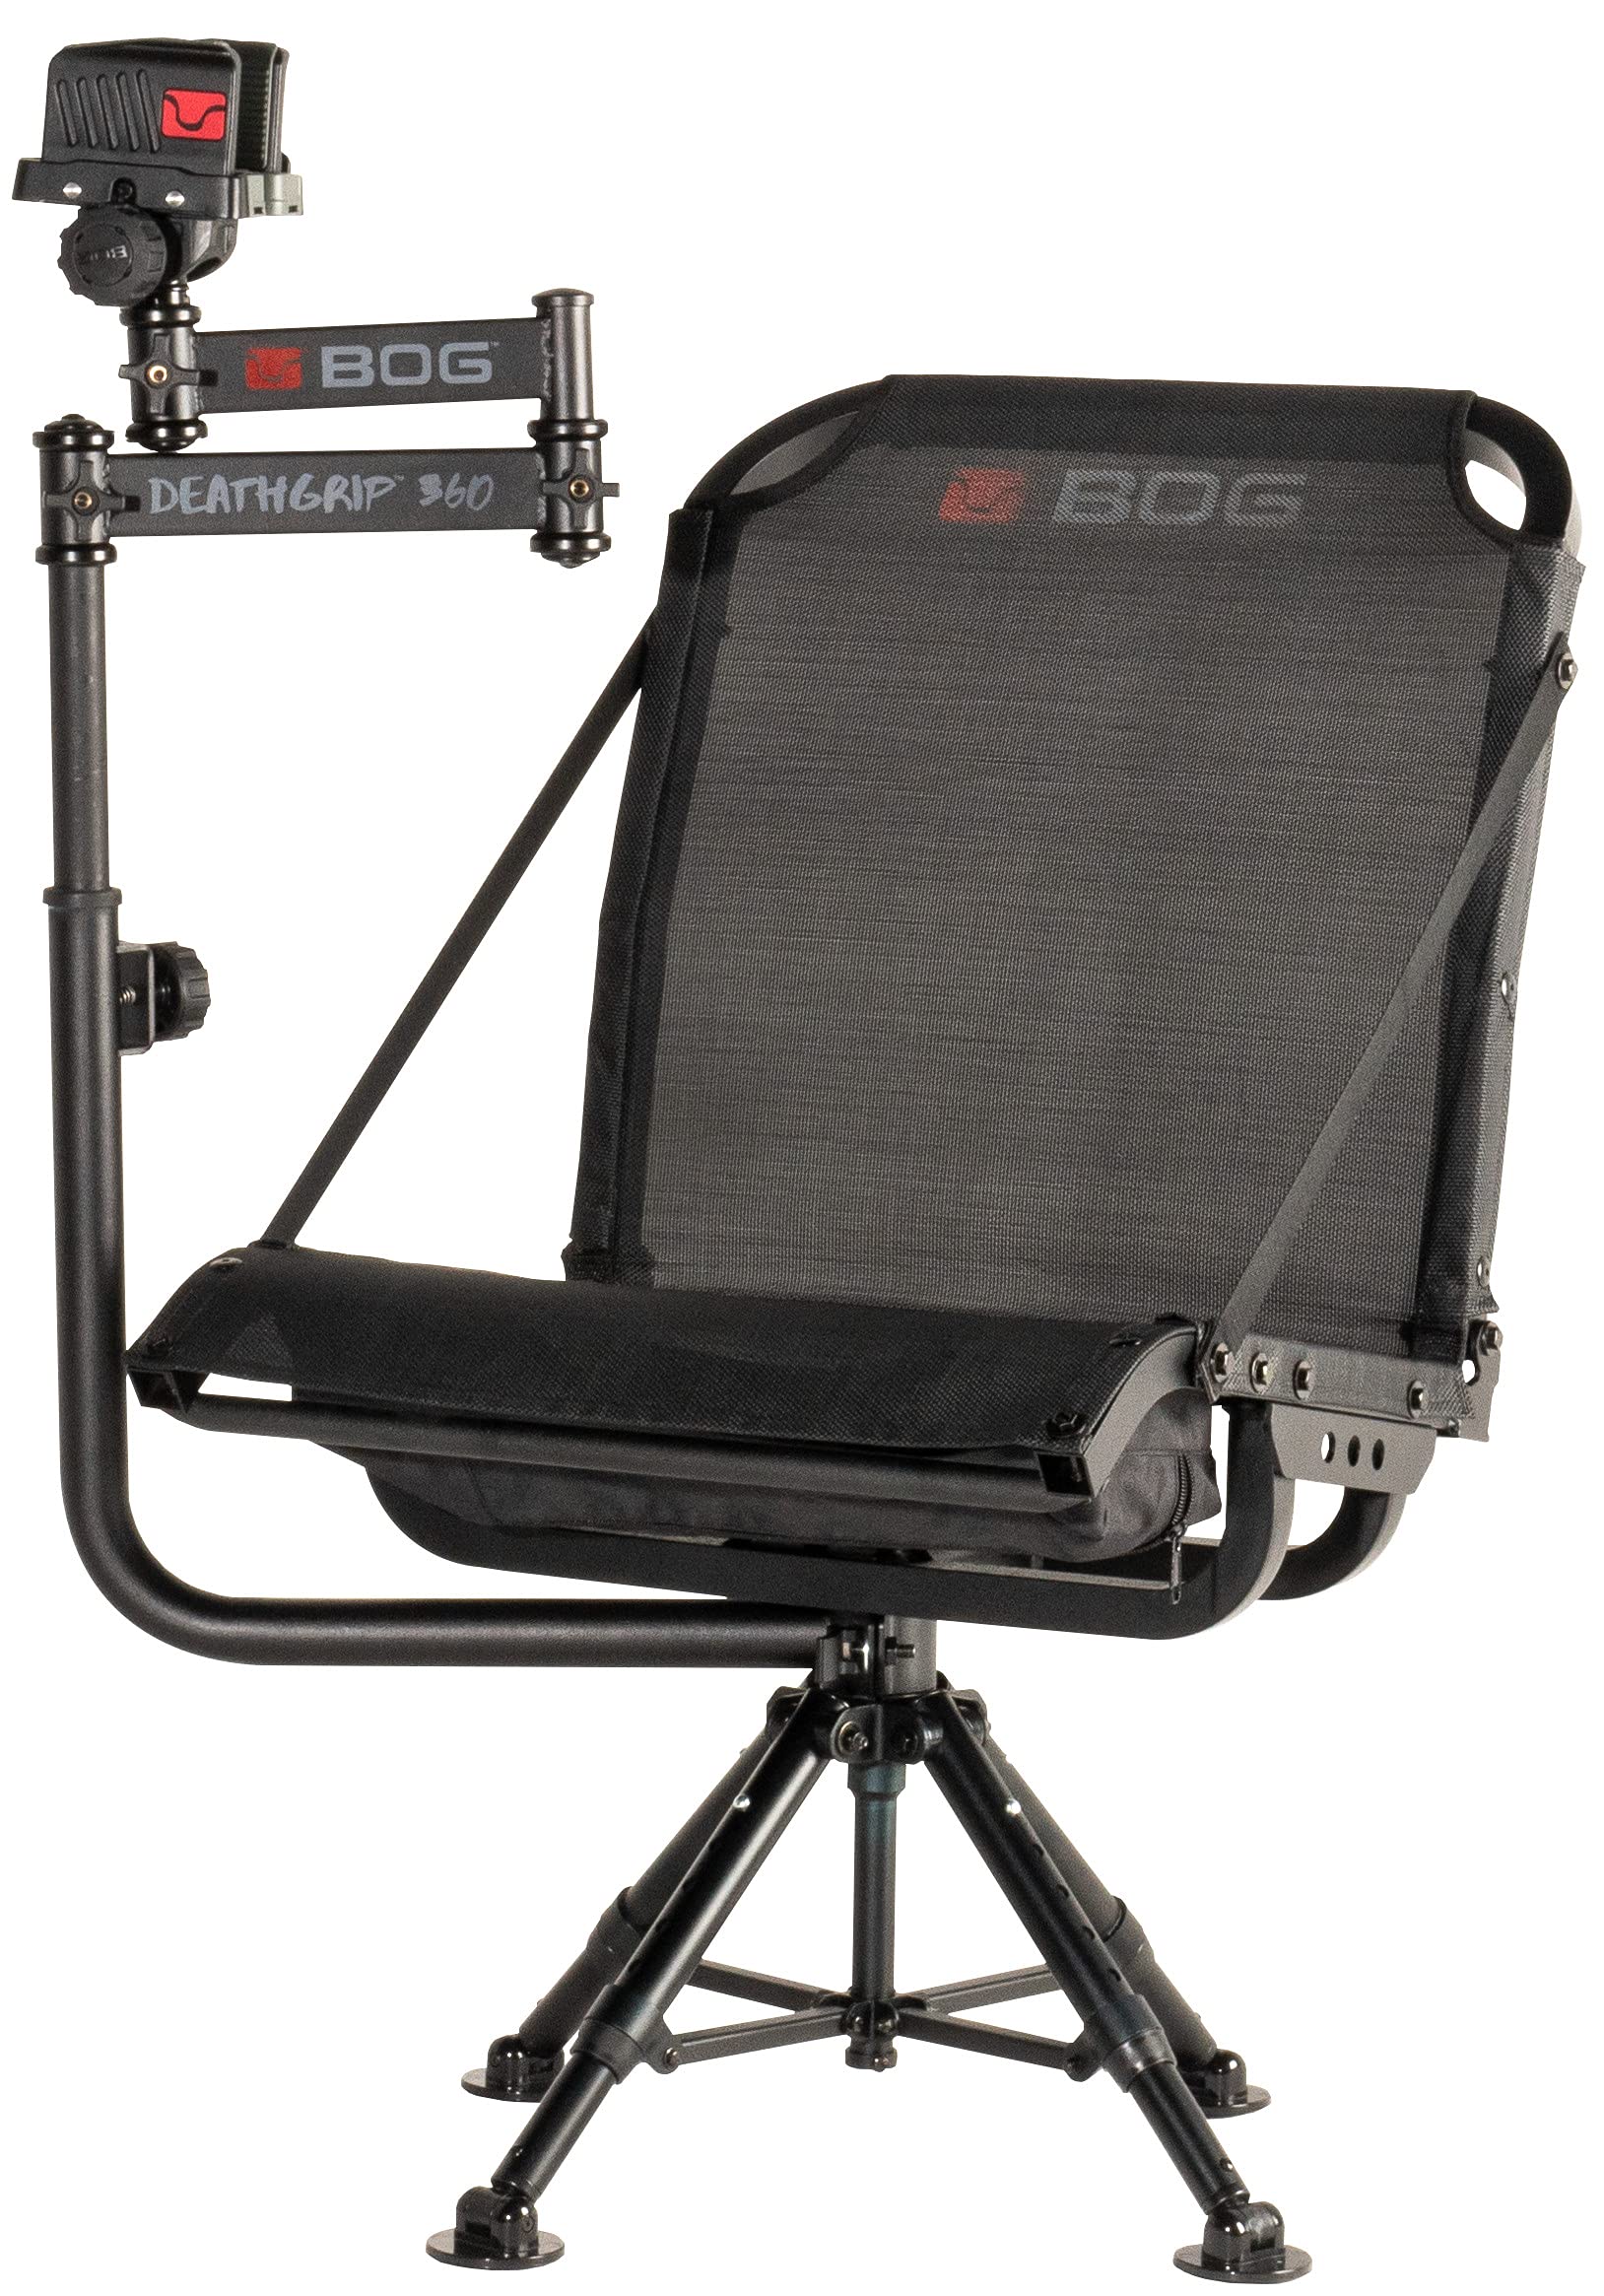 BOG Ground Blind Chairs with Rugged Construction, Aluminum Frame, Extended Seat Area, Quiet Setup, Breathable Textilene Fabric, Collapsible, and Carry Bag for Hunting, Shooting, Sports, and Outdoors